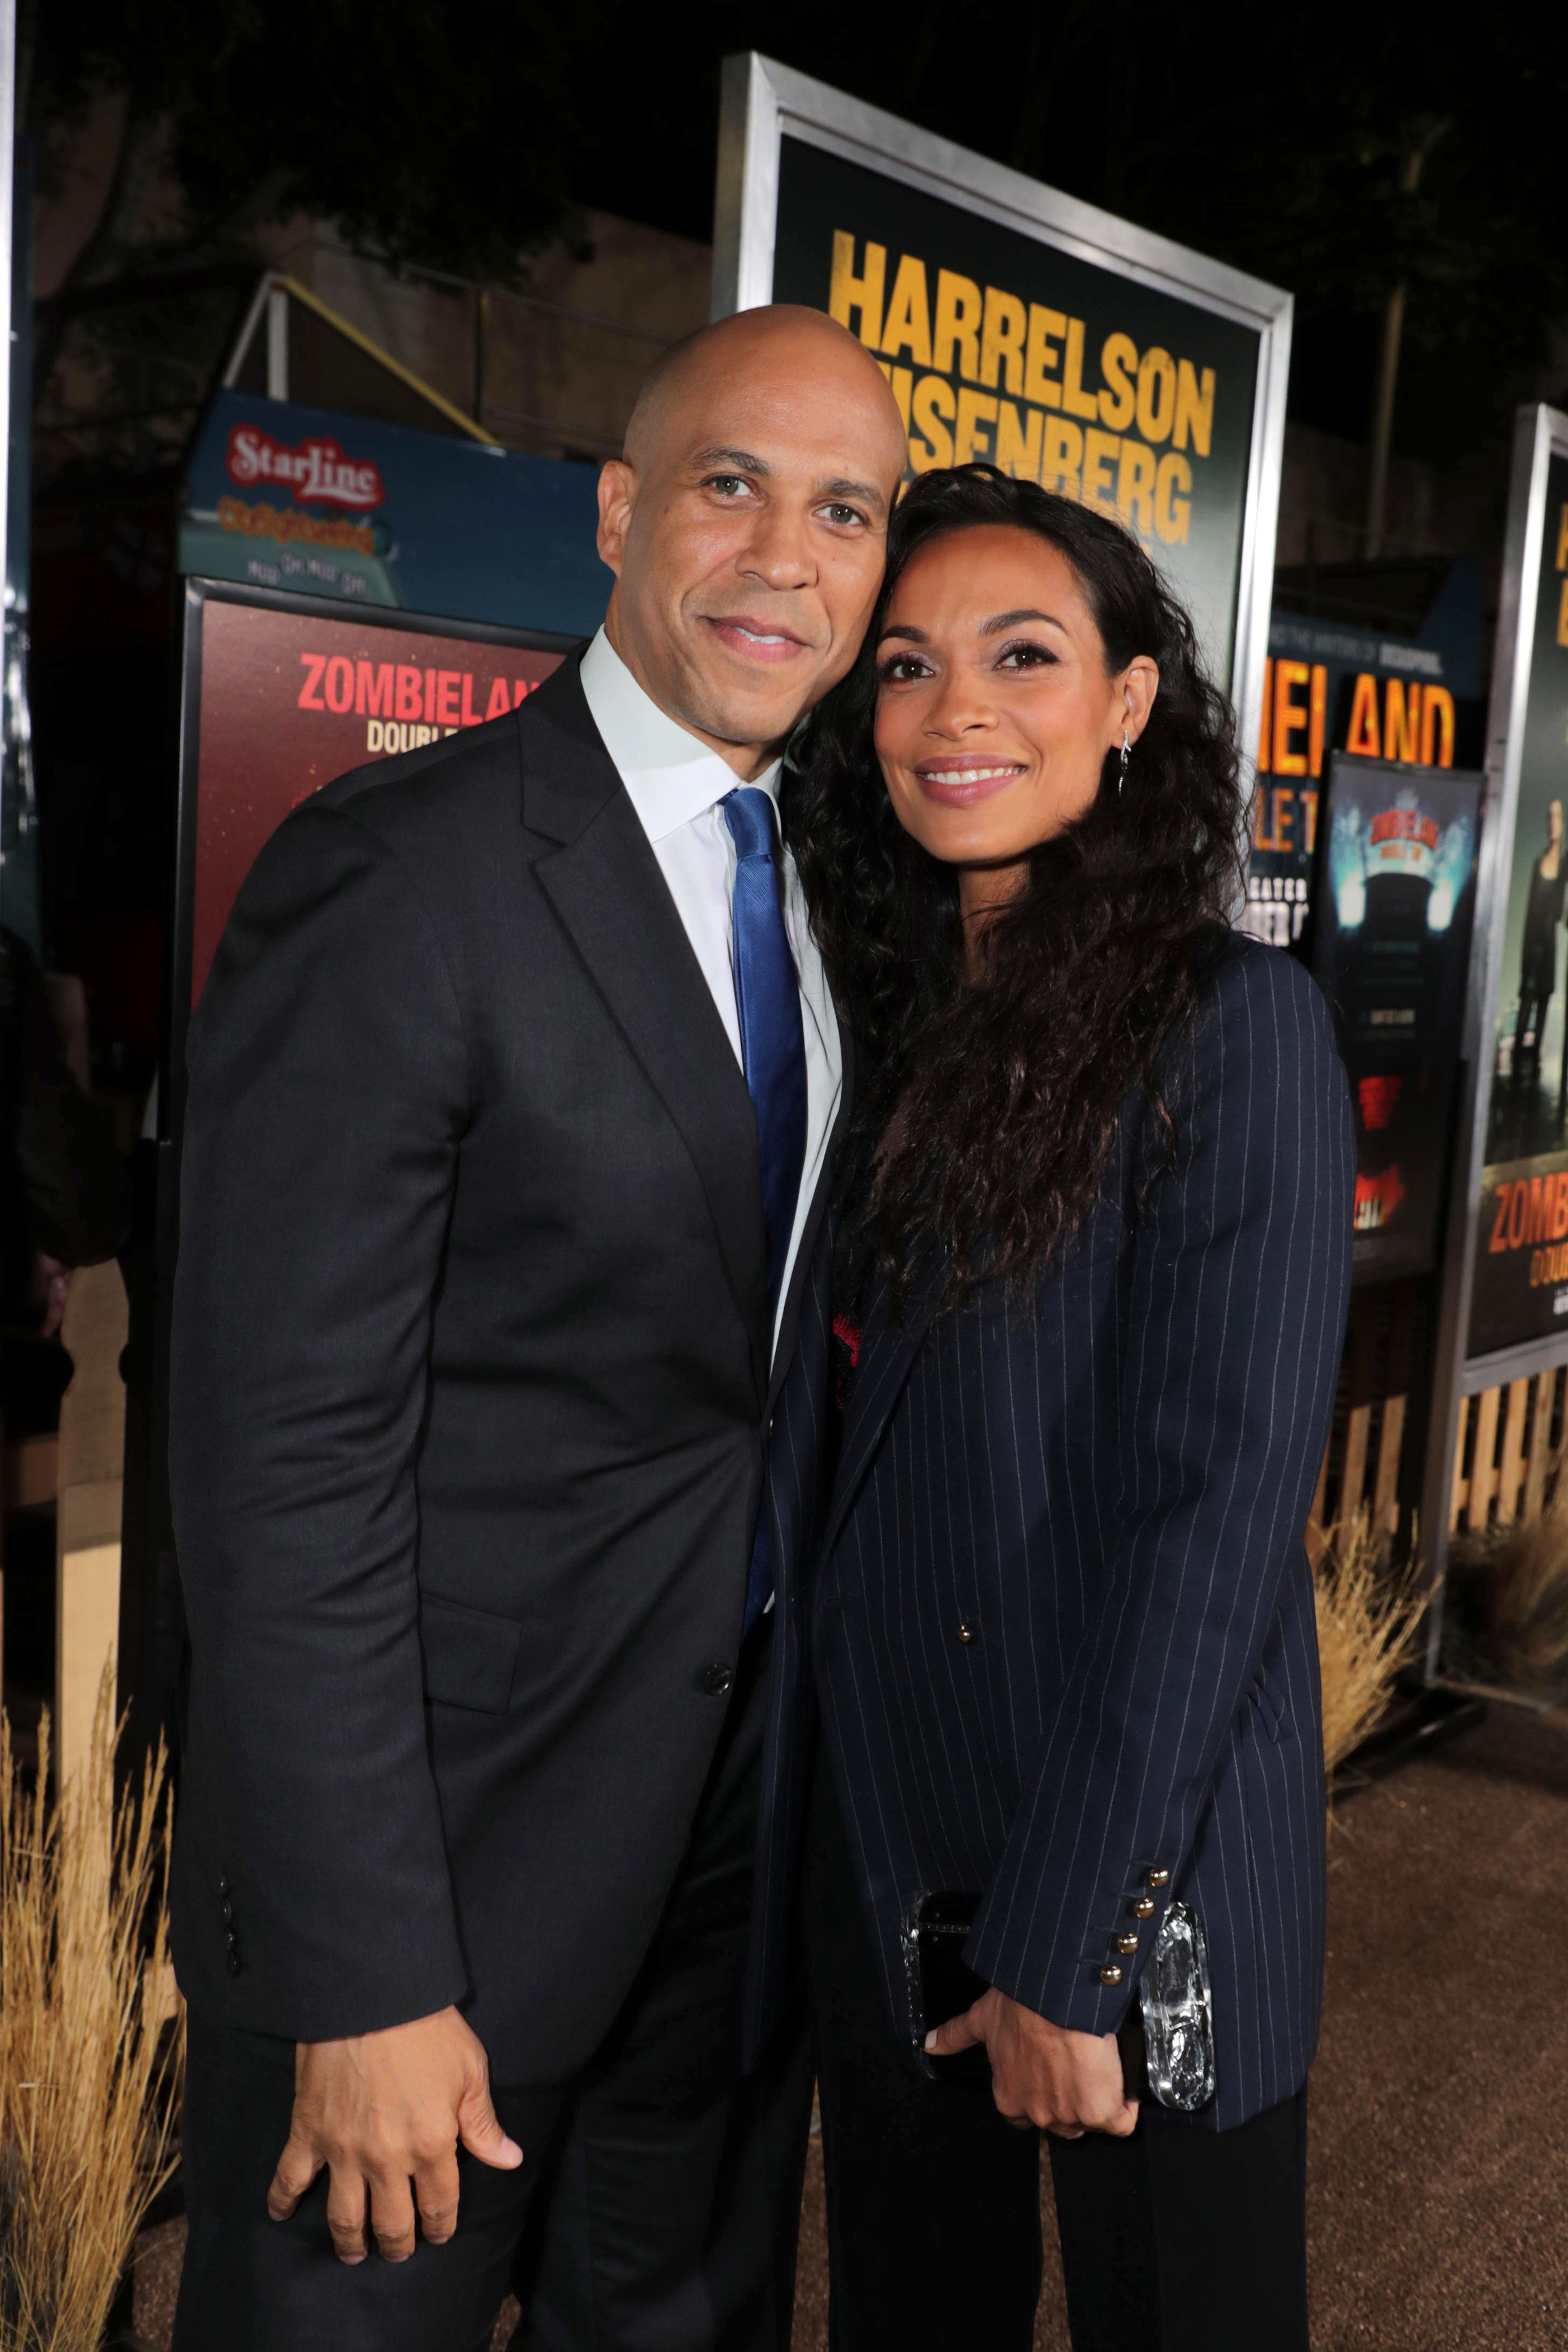 <p>During a March 2019 CNN town hall, Cory Booker detailed how he <a href="https://www.wonderwall.com/news/cory-booker-details-first-meeting-girlfriend-rosario-dawson-3018989.article">first met</a> actress Rosario Dawson at a political fundraiser for Ben Jealous, who ran for governor of Maryland in 2018. "She didn't give me the time of day," he admitted, adding that when they met for the second time, it was "one of those really awkward experiences." Explained the former presidential hopeful, "I'm a United States senator, and I had to get up the courage to walk up to her and ask her for her phone number. And [public speaking] doesn't make me nervous, but that made me nervous." During a late-2019 appearance on "<a href="https://www.youtube.com/watch?v=AbvXXvB-qG4">The Wendy Williams Show</a>," he revealed that their second meeting took place at a party thrown by comedian Sarah Silverman. "I have a lot of confidence in a lot of areas, but I tell you, I did not feel confidence when I asked for her phone number," he said. "I walked up to her. It was the end of the party. We had already talked a little bit and people were drifting out, but she and I were kind of lingering. I walked up to her, and I said, 'Well, how would I contact you if I wanted to get in touch with you?' And she goes, 'Oh, you're asking for my phone number.' … This was a shy moment for me definitely, but [Rosario] was merciful and gave me her phone number." The duo have remained friends since ending their romantic relationship in 2021. </p>